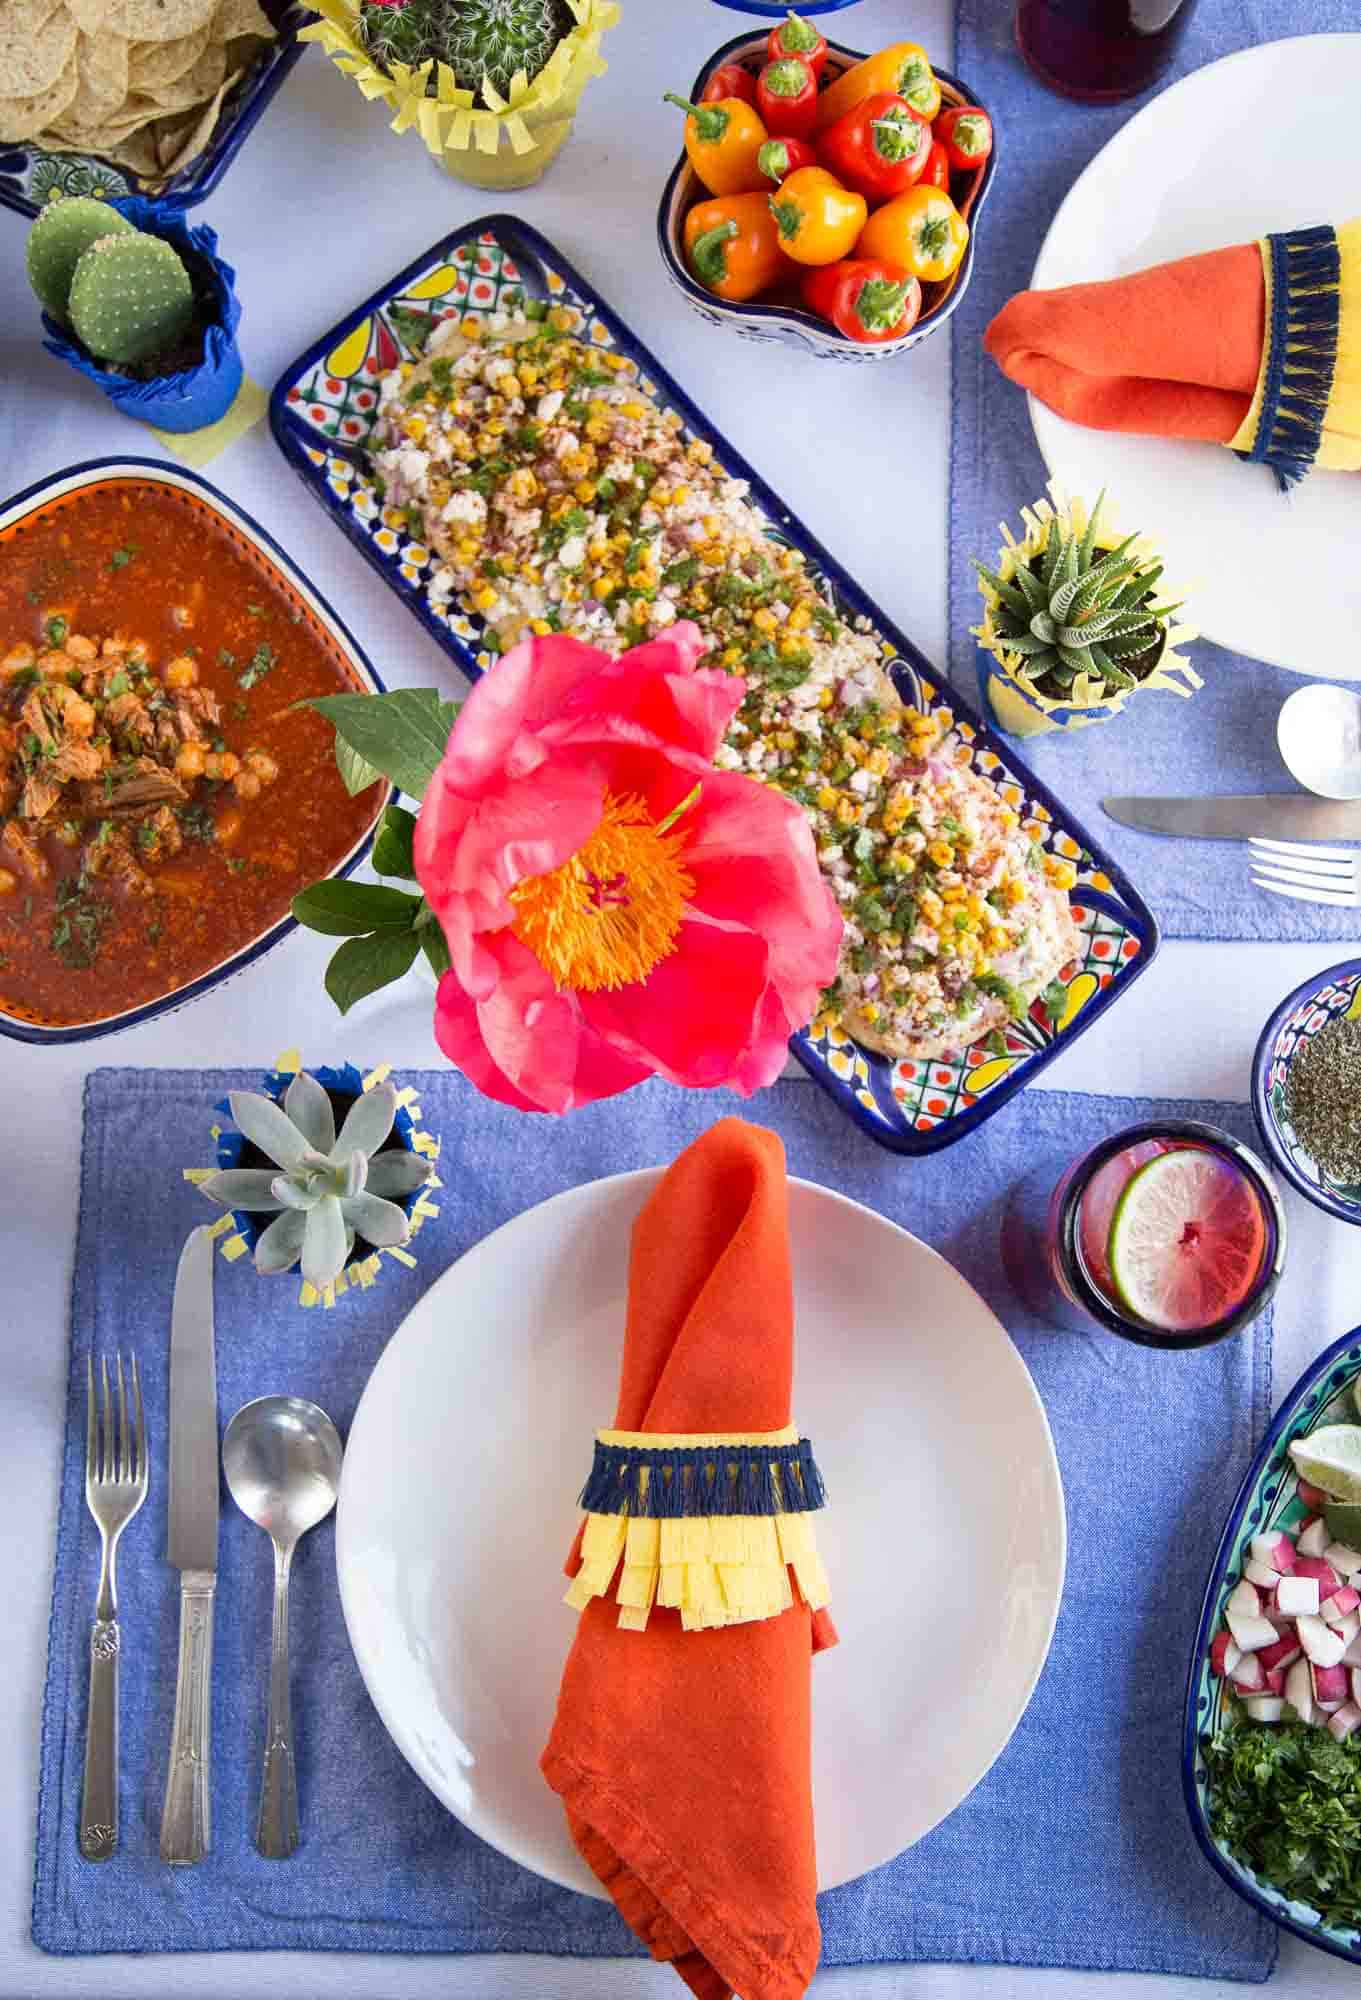 table set with white plates, silverware, an orange napkin with a colorful napkin ring, mexican food, and a single pink peony.